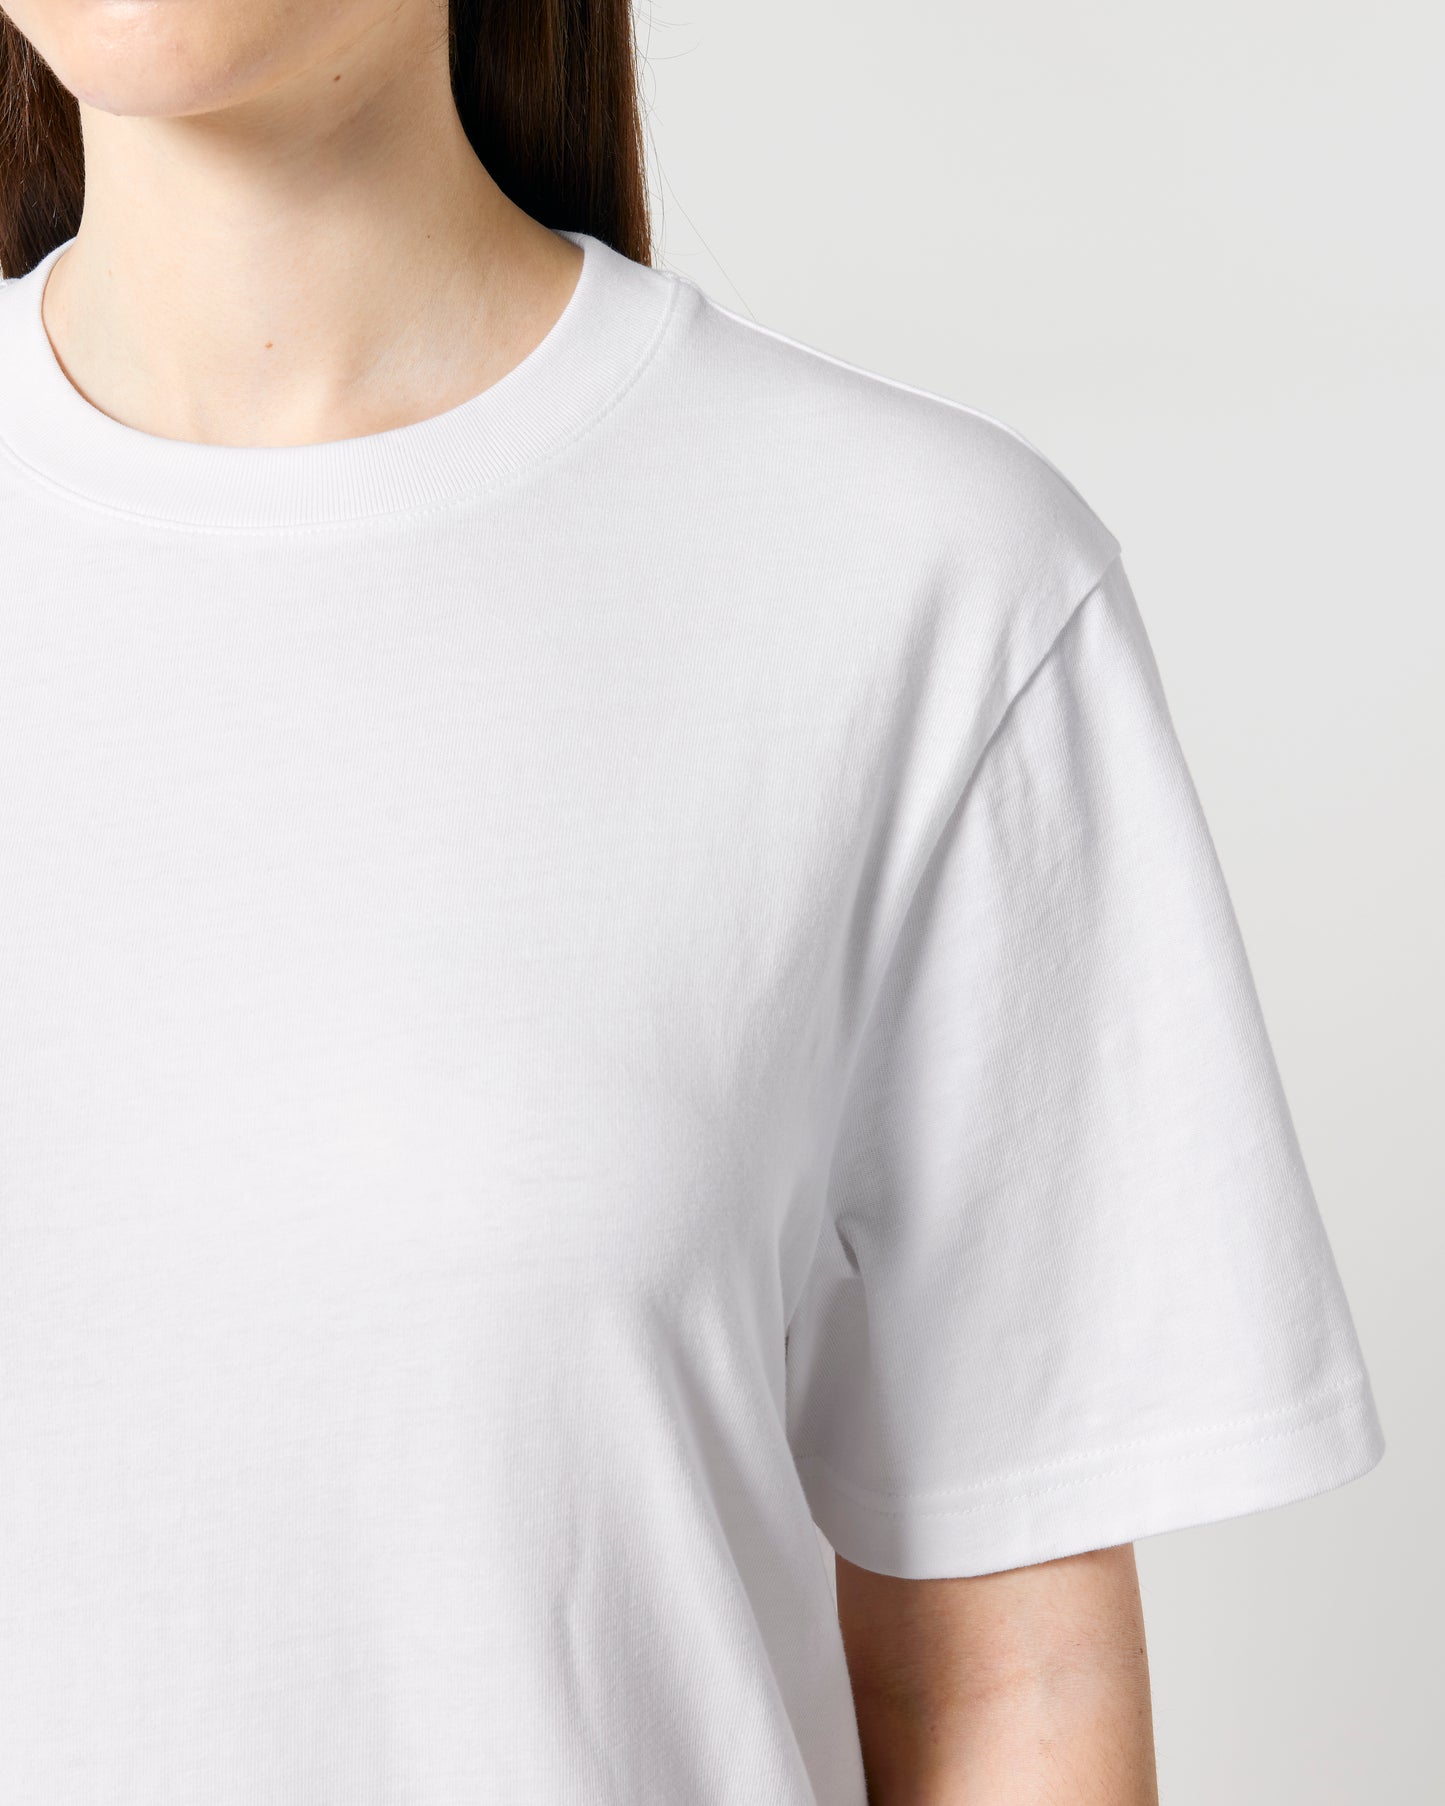 It Fits Swish - Unisex Relaxed Fit T-shirt - Heavyweight -White